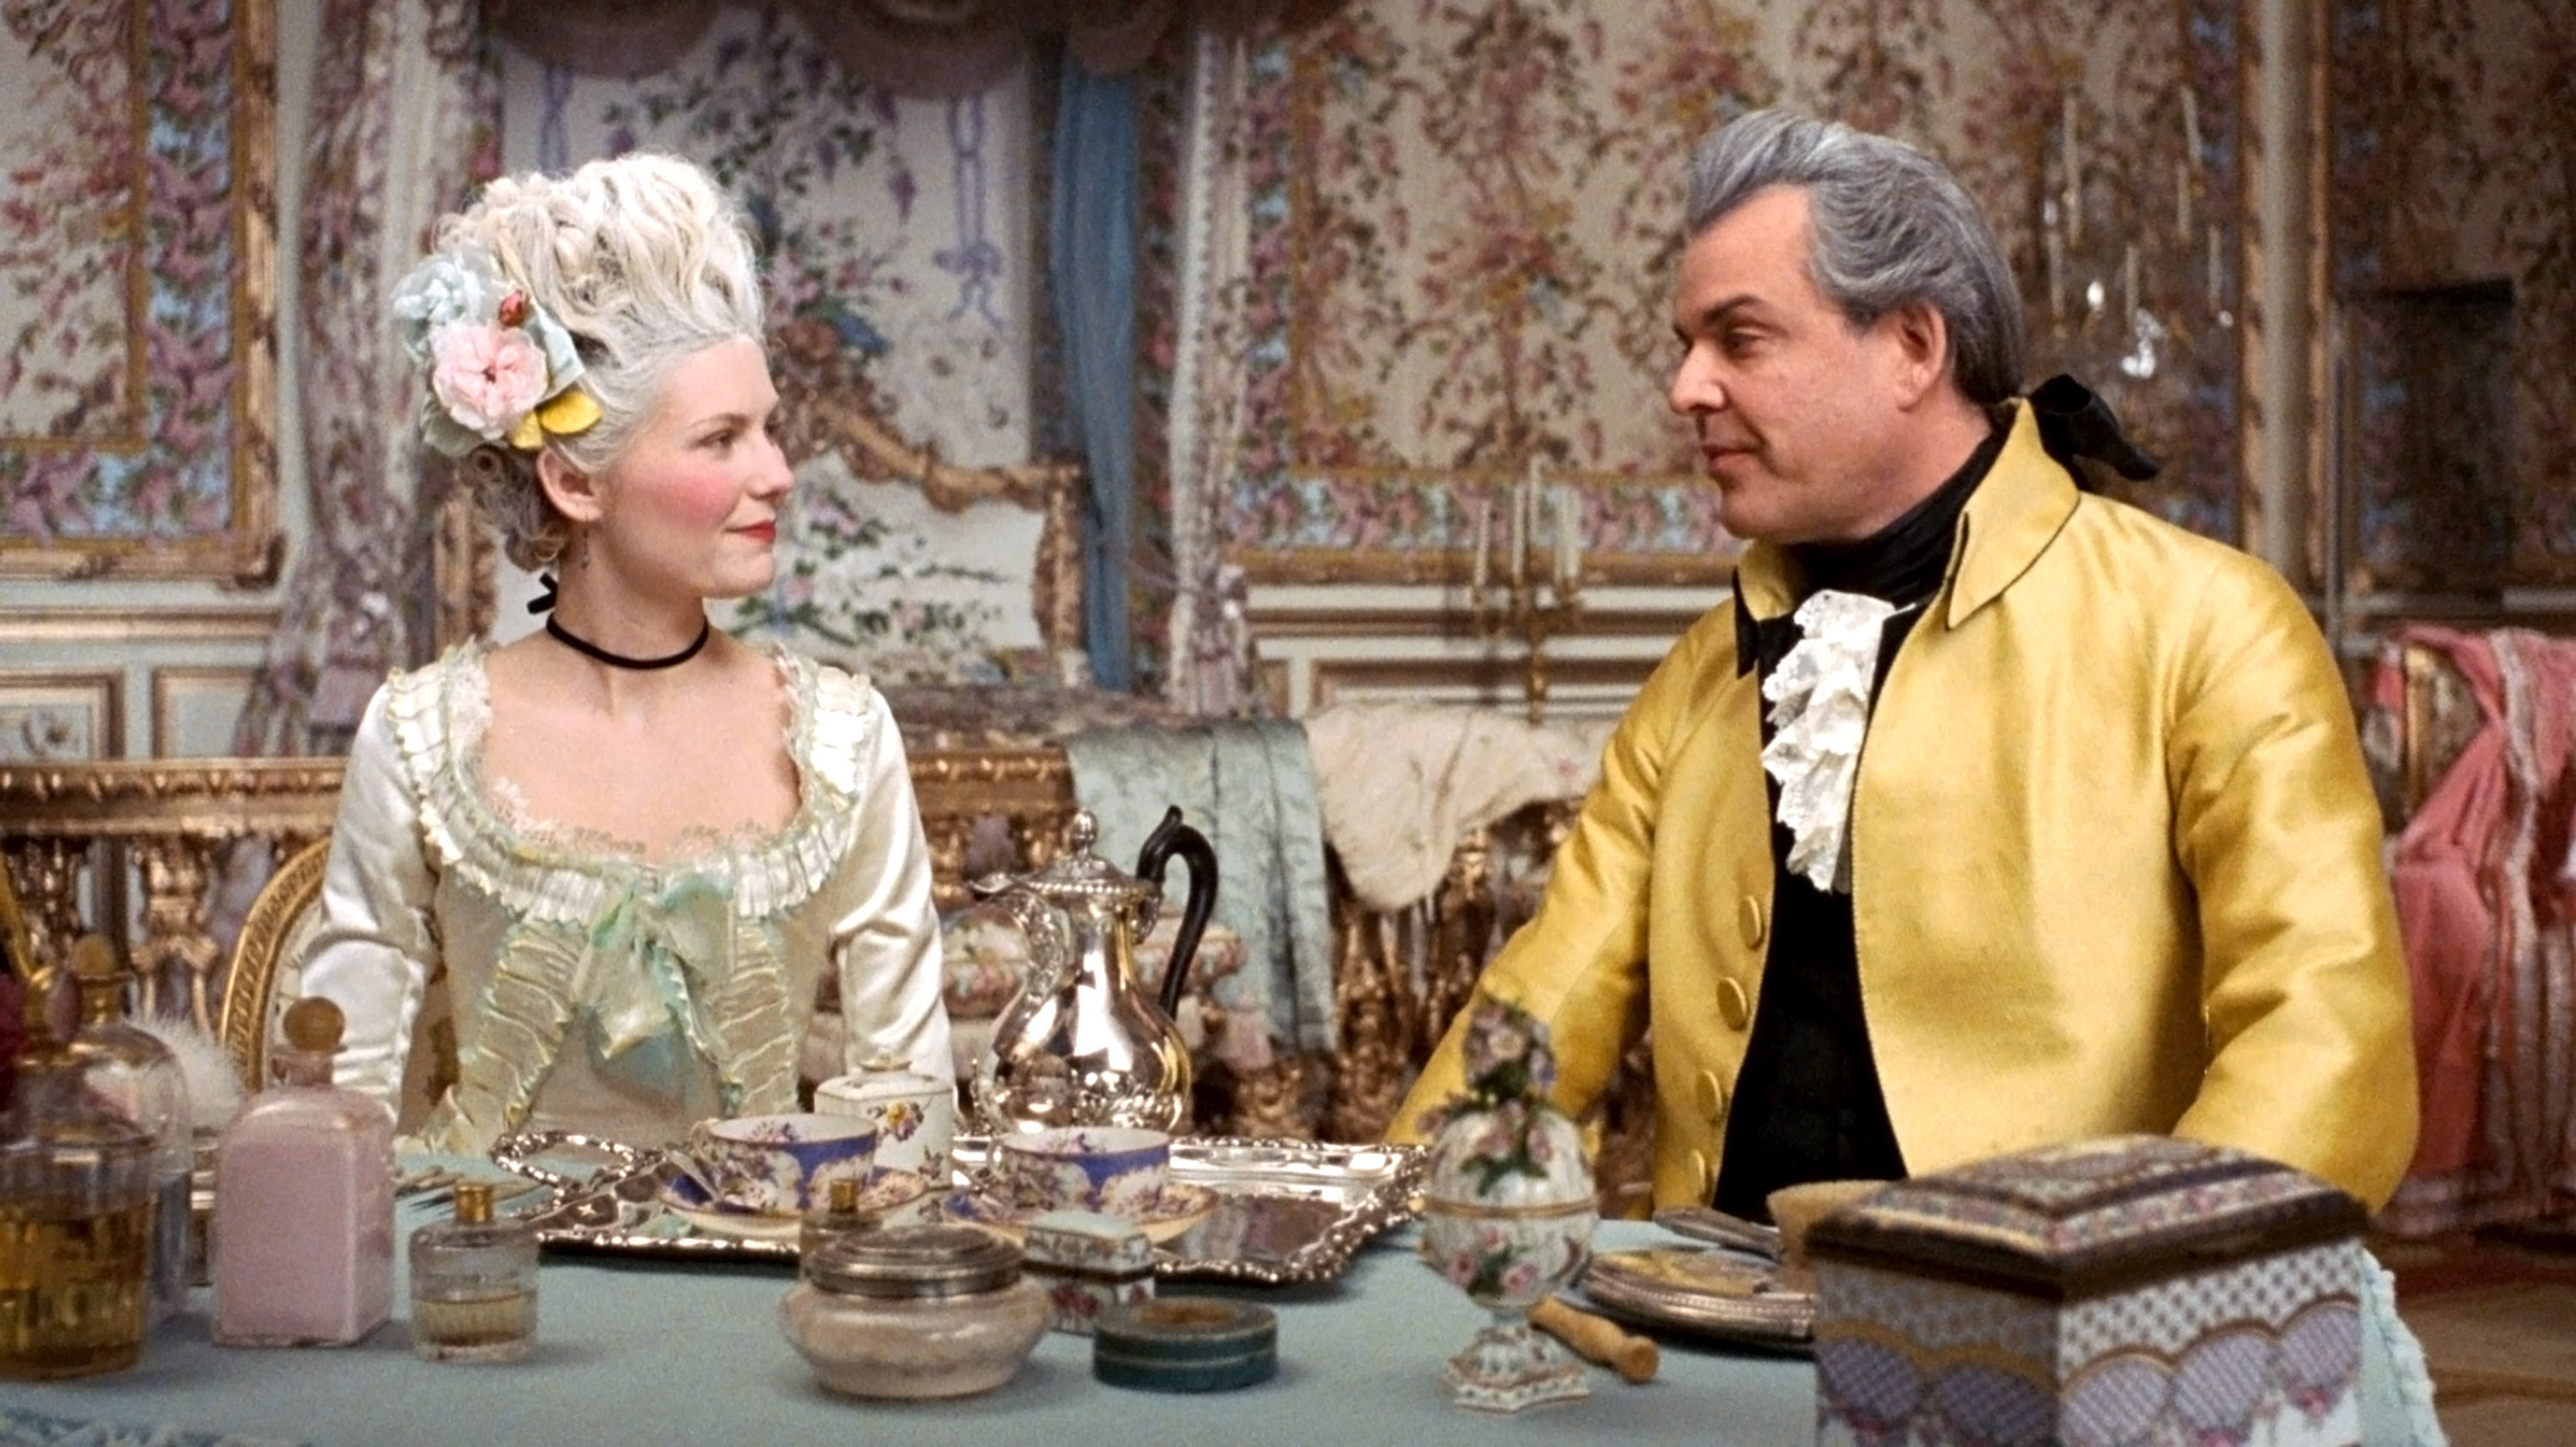 Kirsten Dunst and Danny Huston sit at tea wearing prerevolution French finery